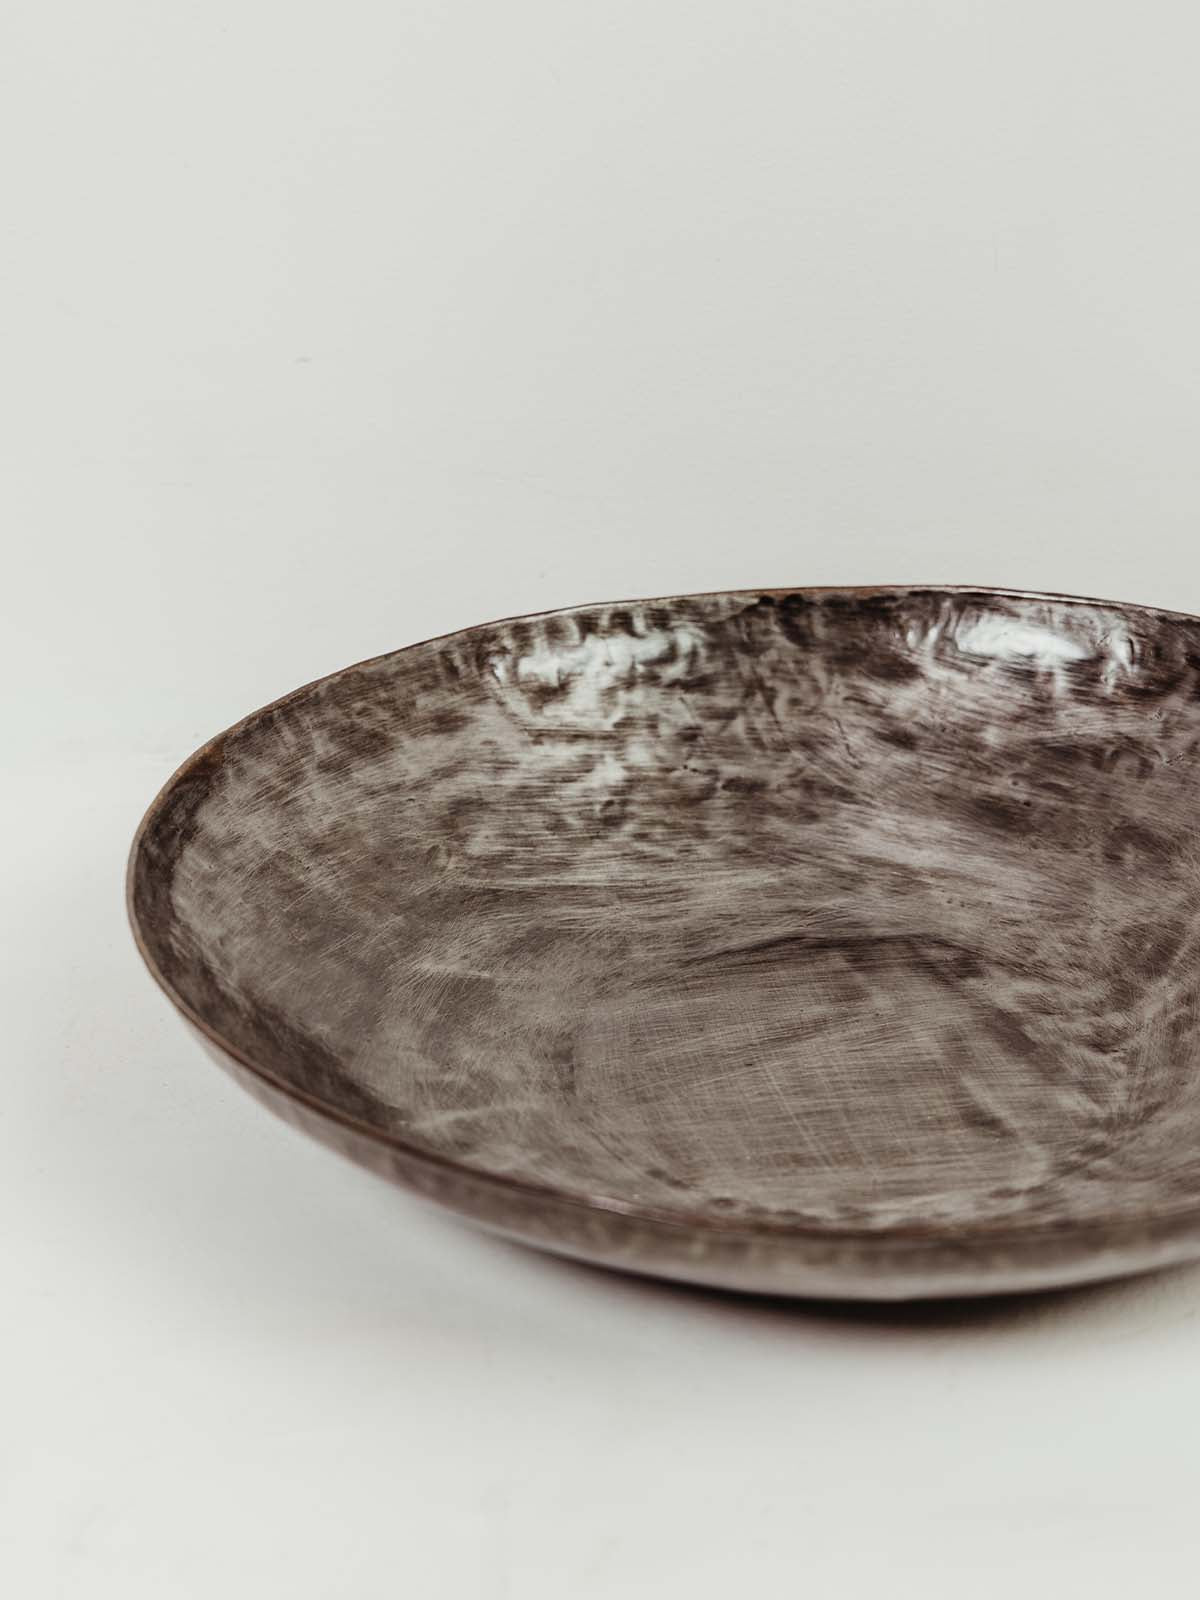 Hammered bowl at an angle to show shallow depth. 